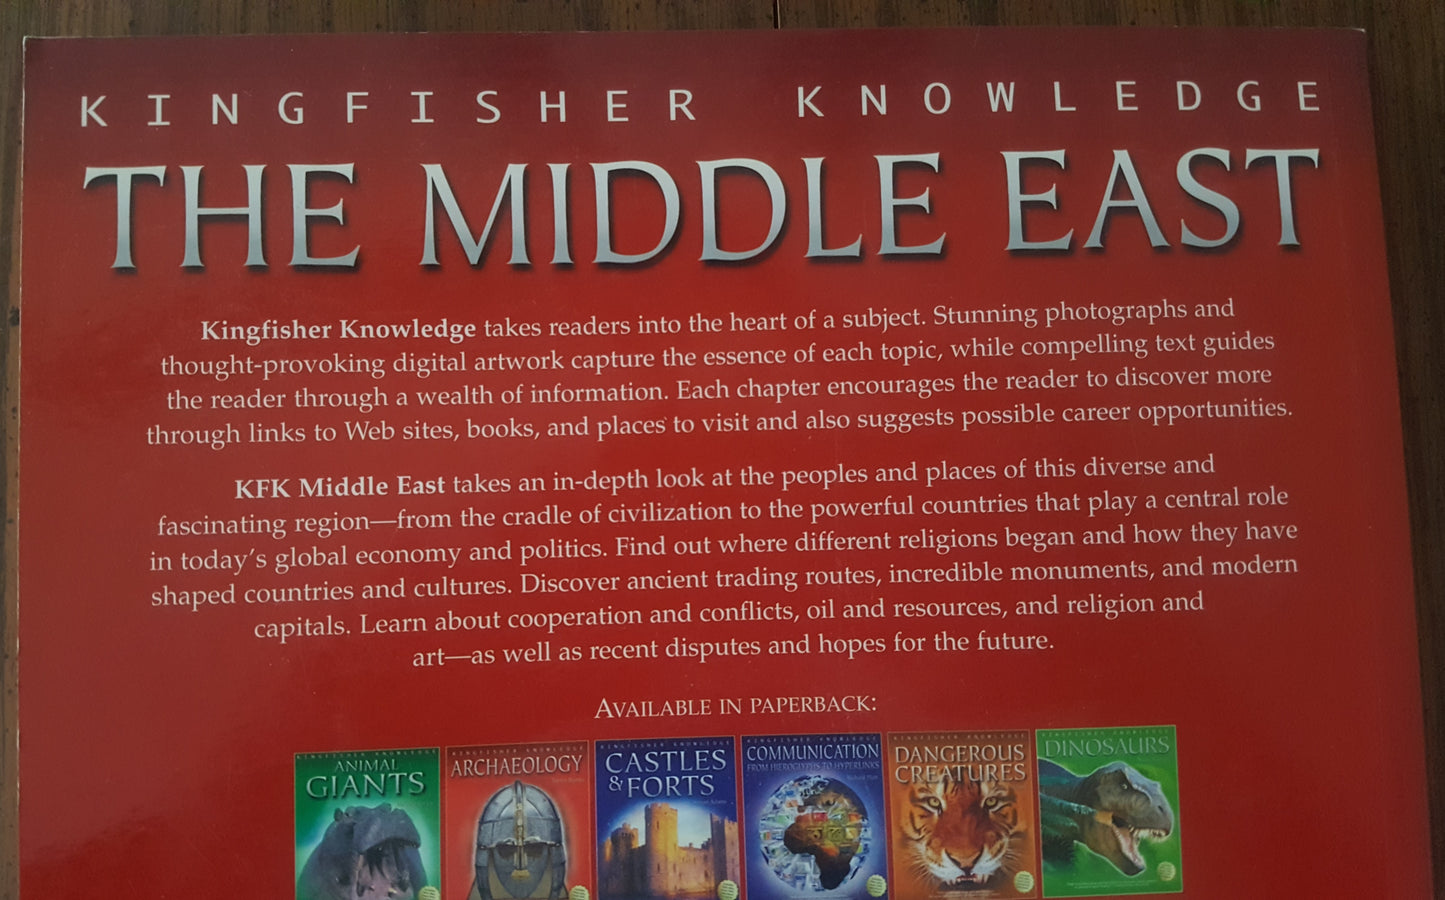 Kingfisher Knowledge The Middle East